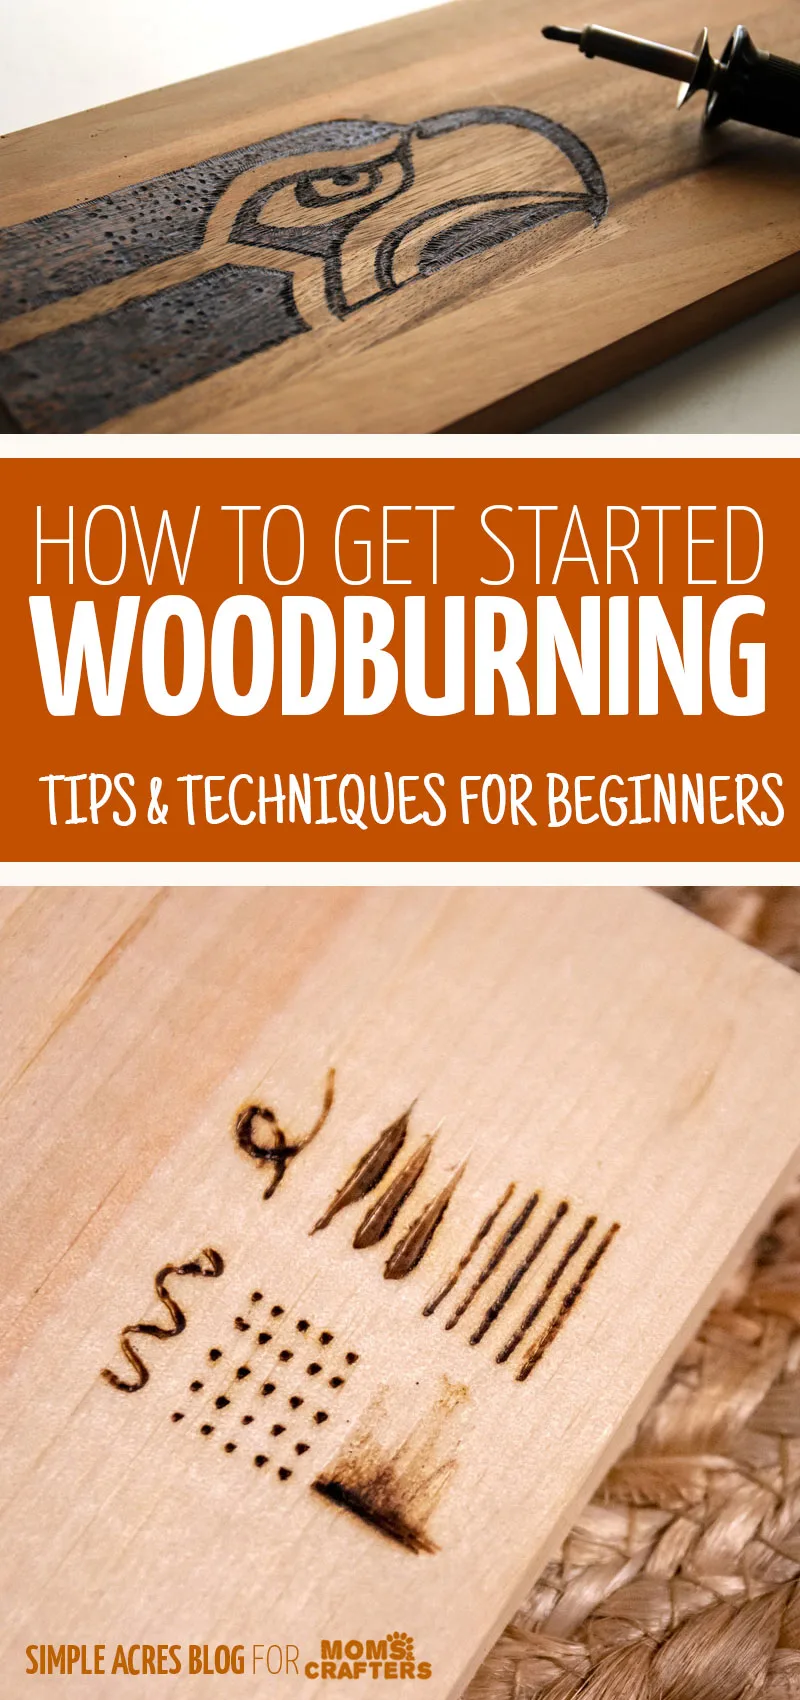 click for woodburning tips and techniques for beginners! Make your own wood burning signs and spoons, and more as DIY gifts! #woodburning #pyrography 